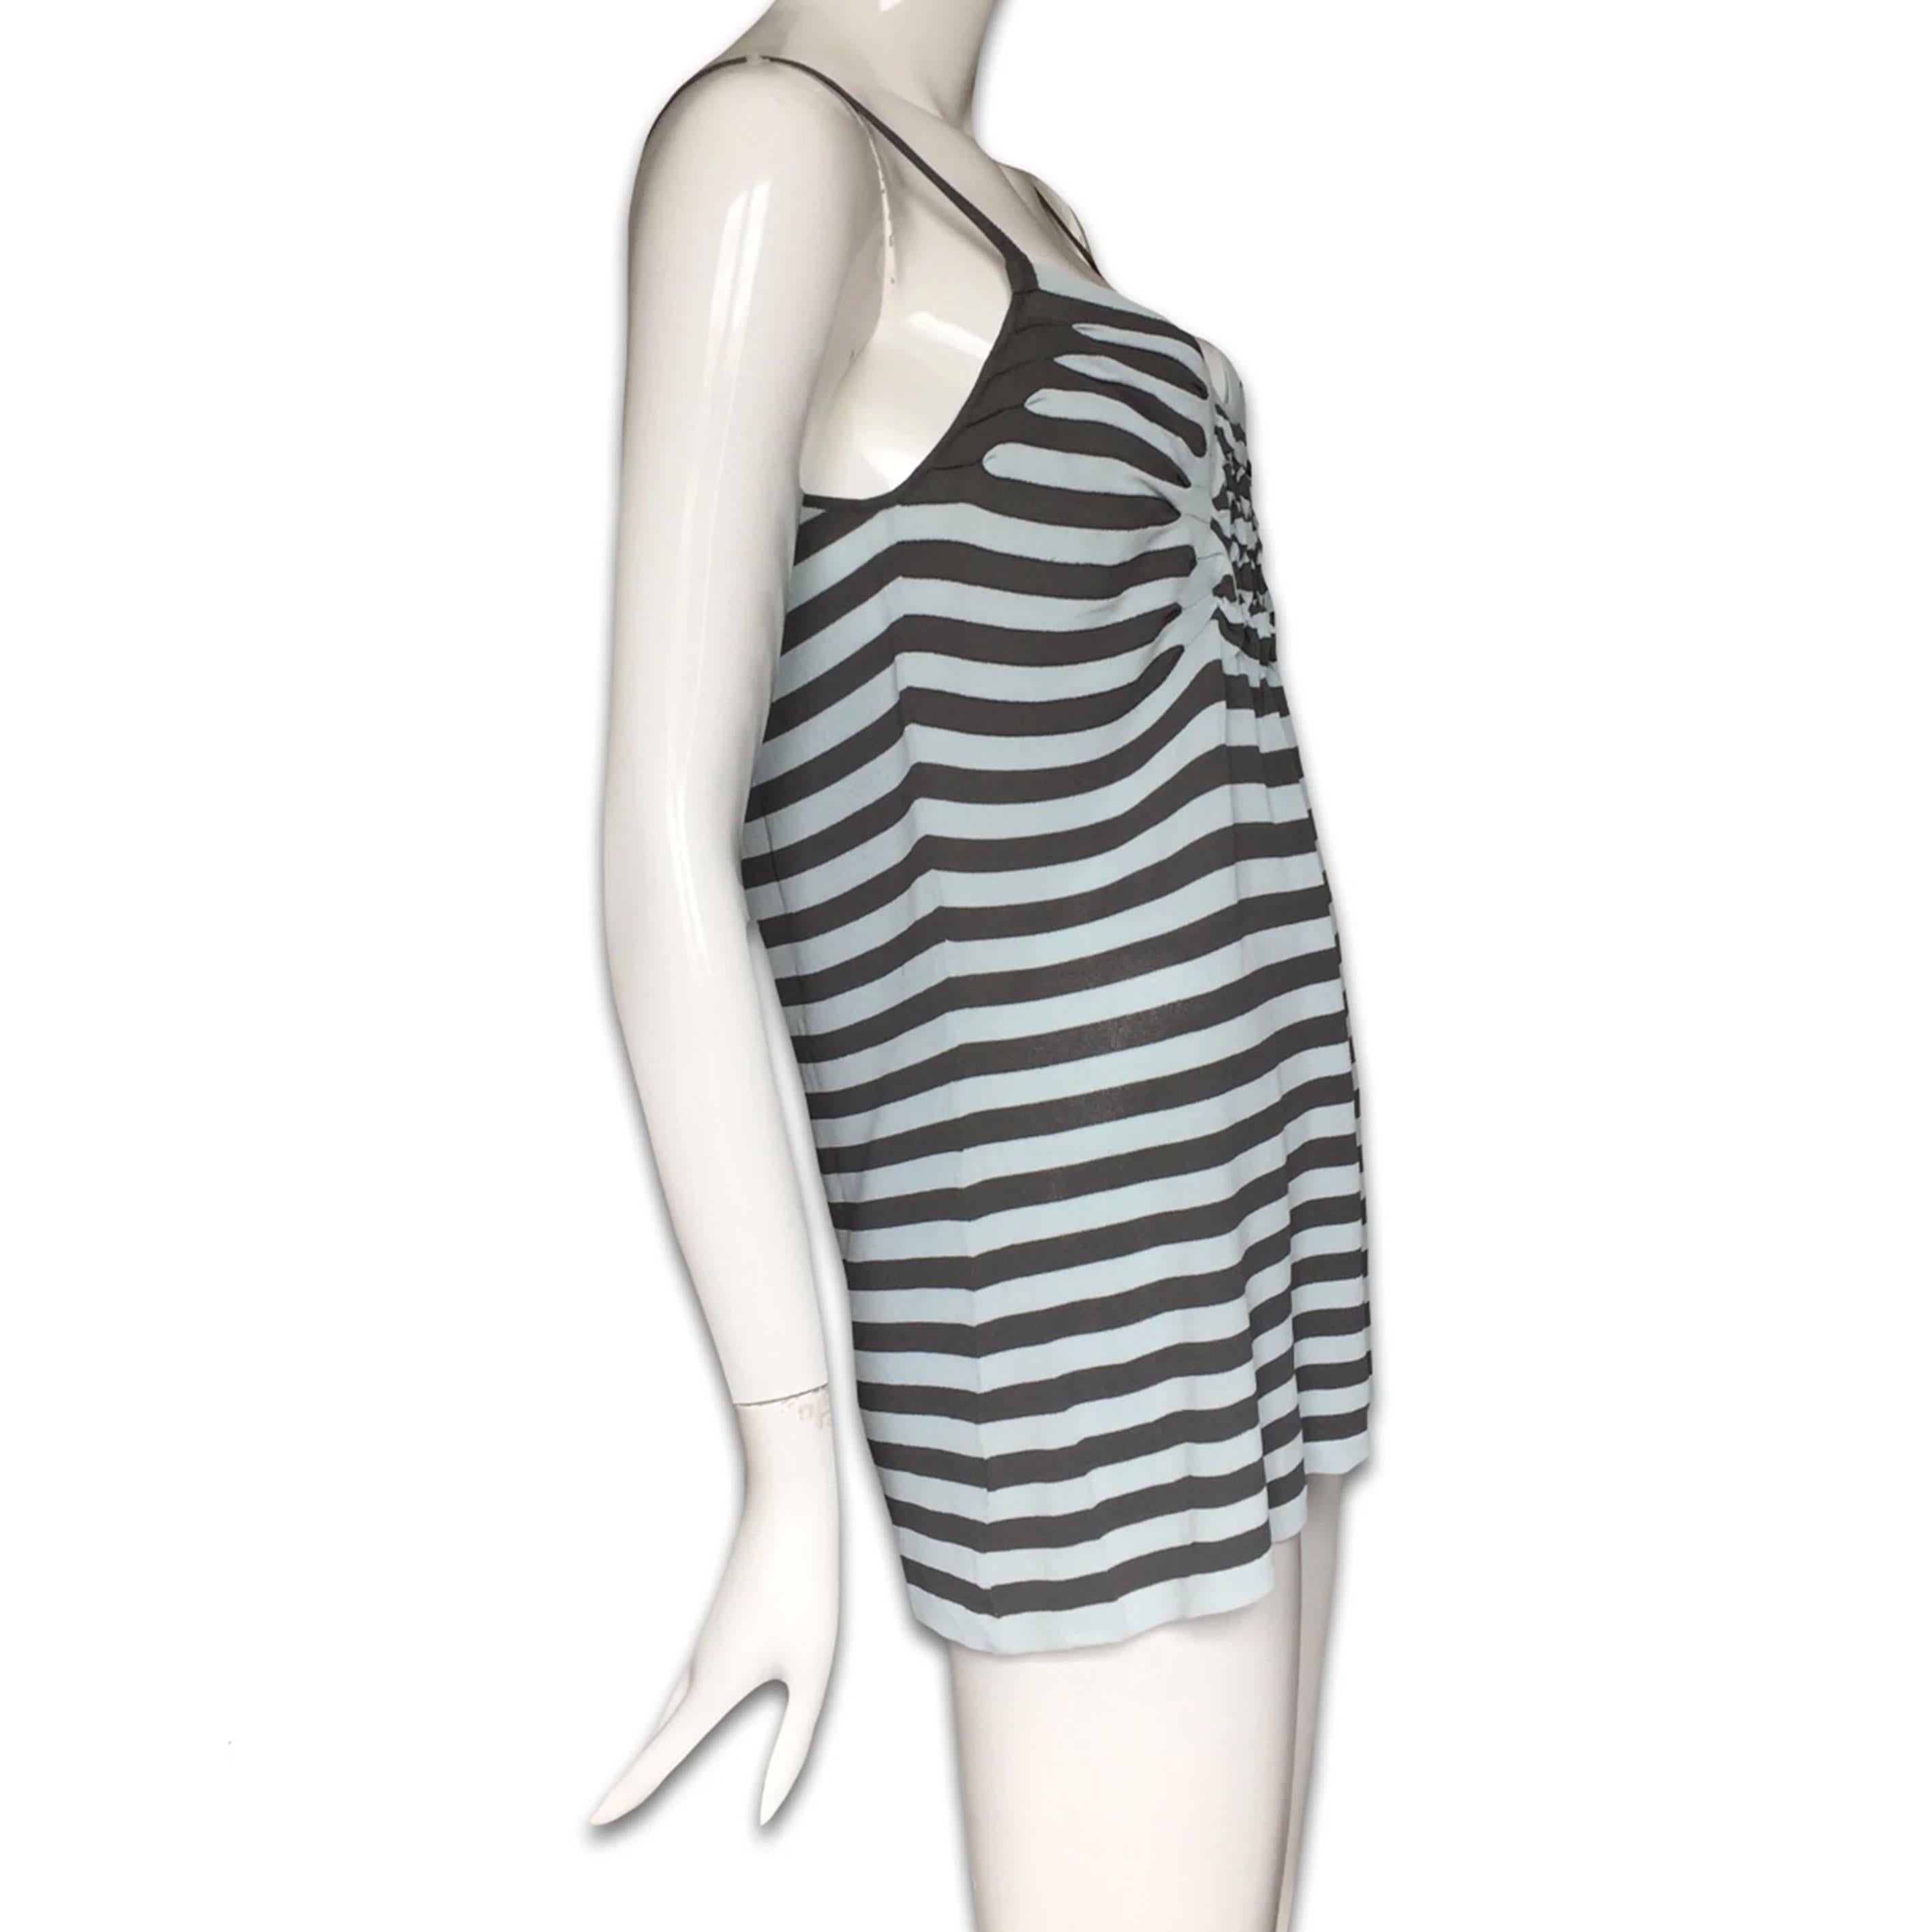 GIORGIO ARMANI SS2003 Light green and grey stripes with ruched details on the front

Tag: GIORGIO ARMANI

Size M ( 42 IT )

Length: 65cm/ 25,59 inches

Chest: 35cm/ 13,77inches

94% viscose

6% polyester

Perfect condition
